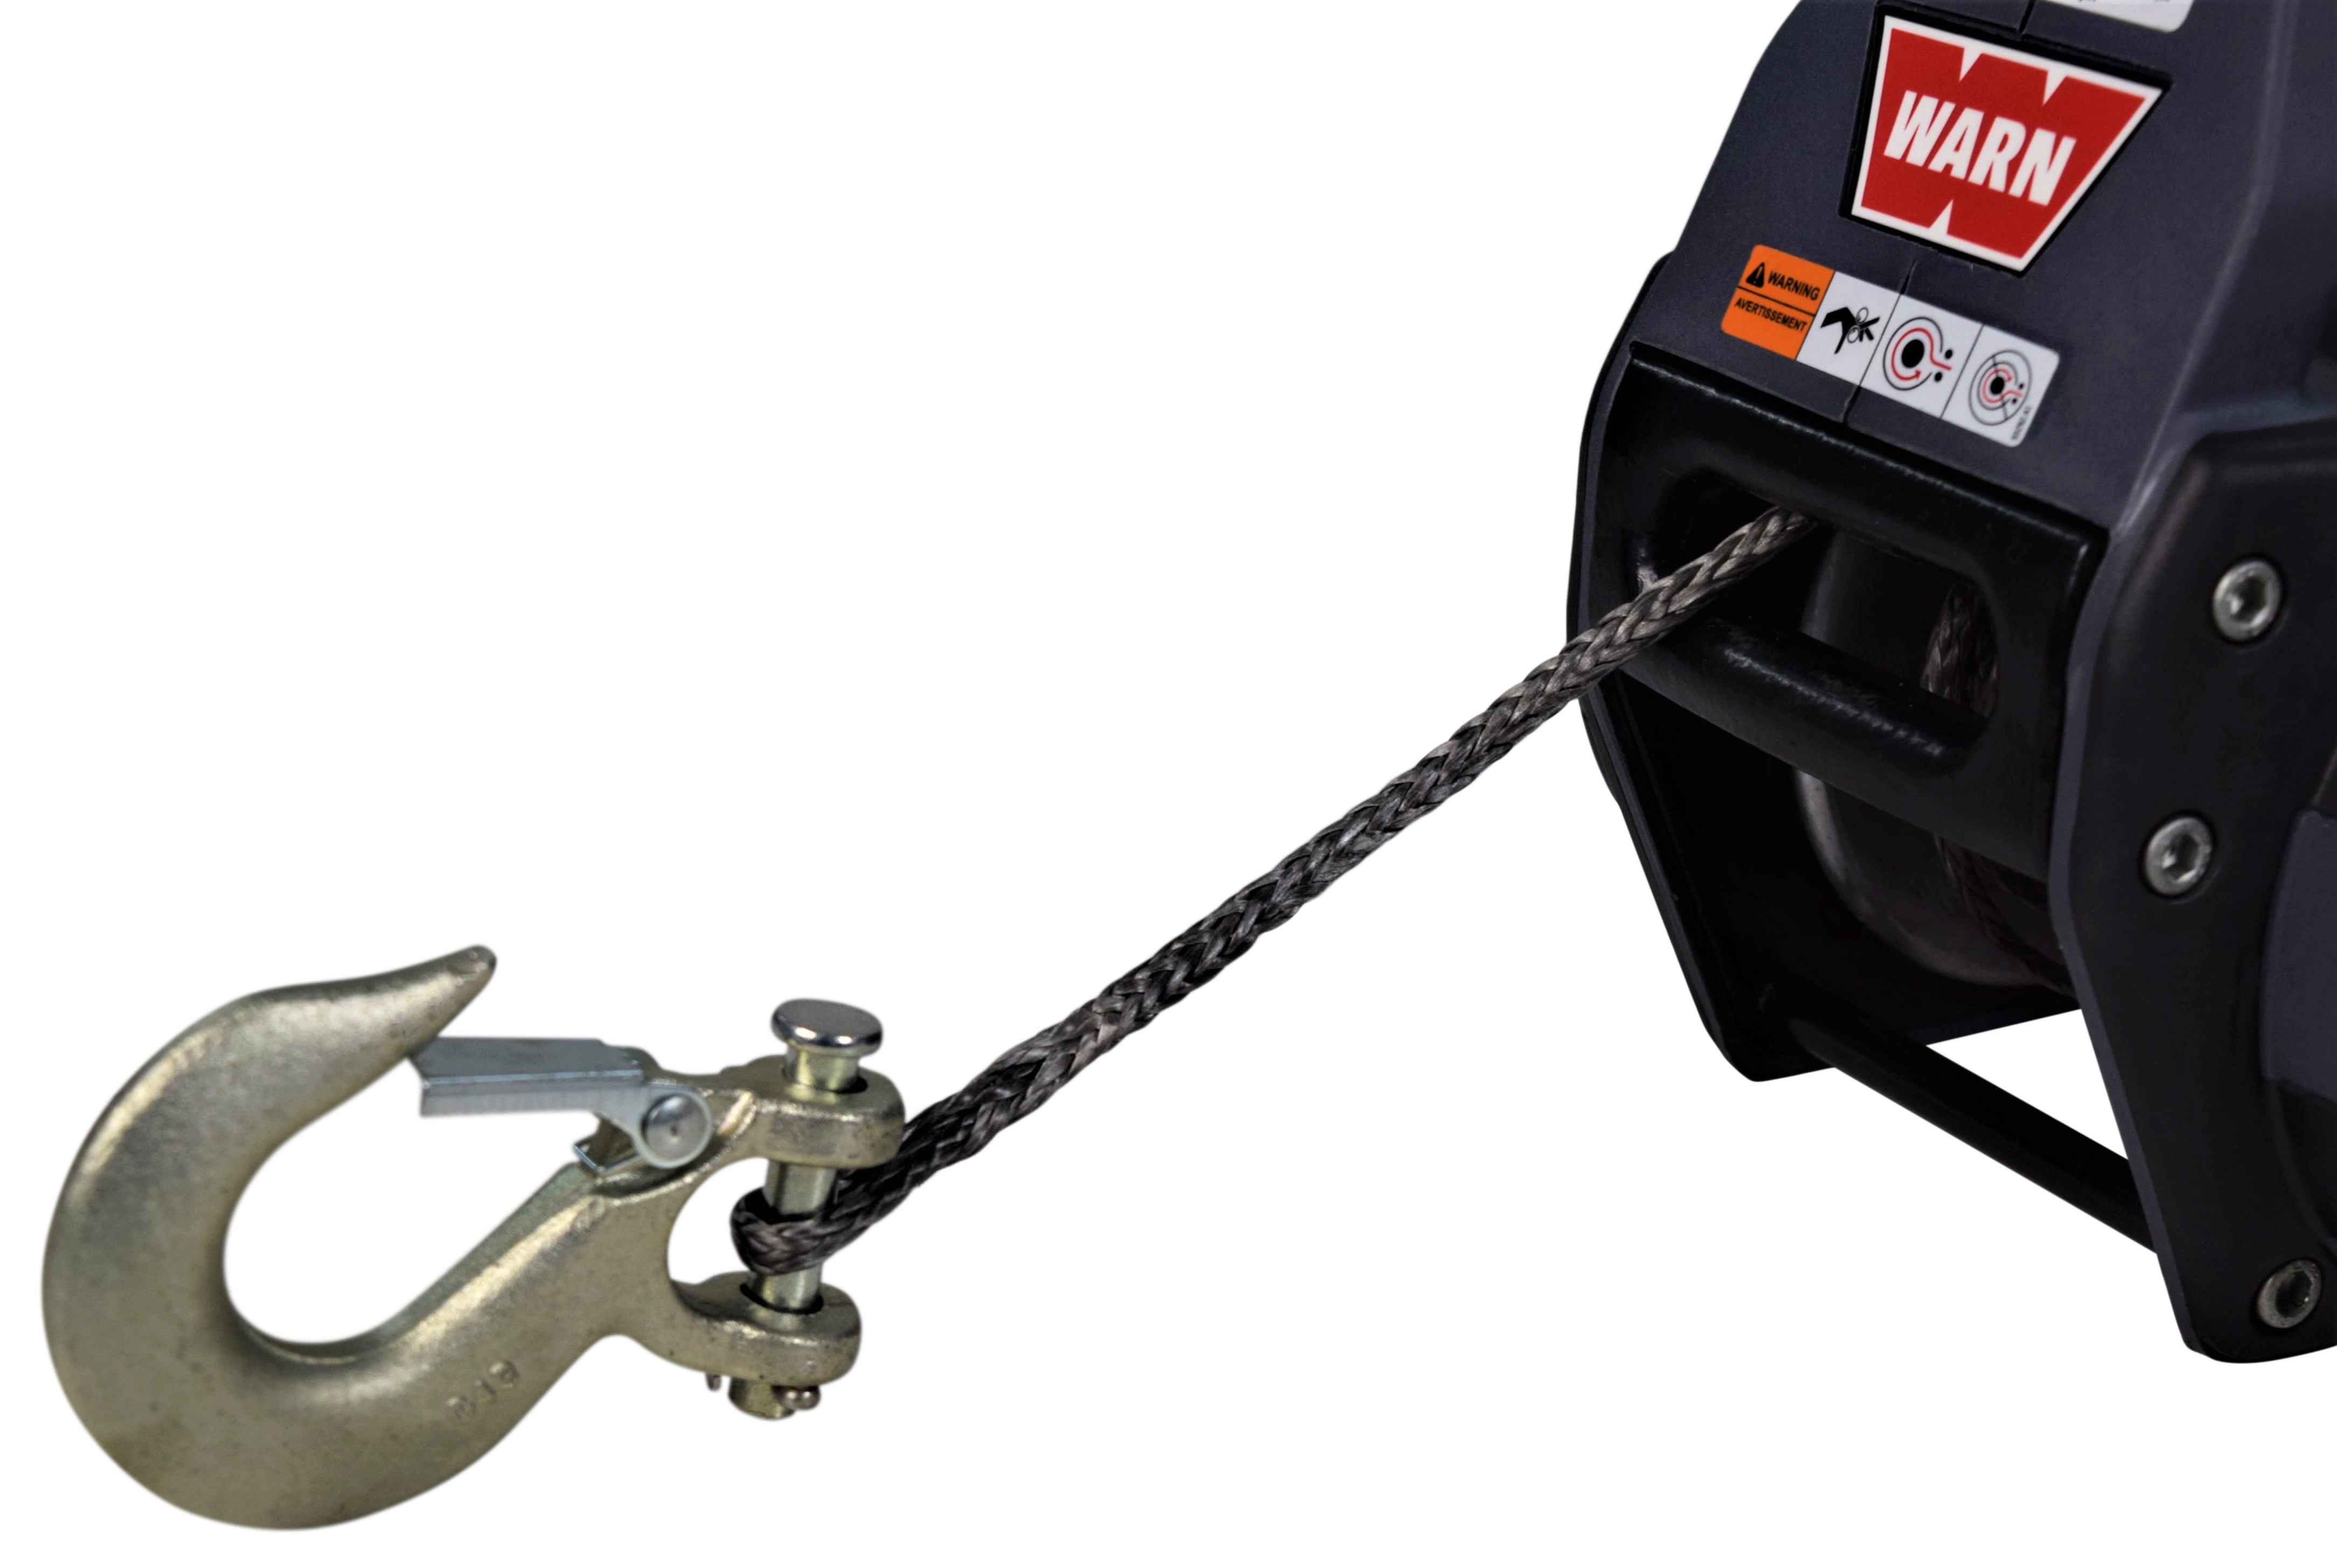 Warn-101570-Drill-Winch-750-lbs-Capacity-40-Synthetic-Rope-Free-spool-Clutch-image-8